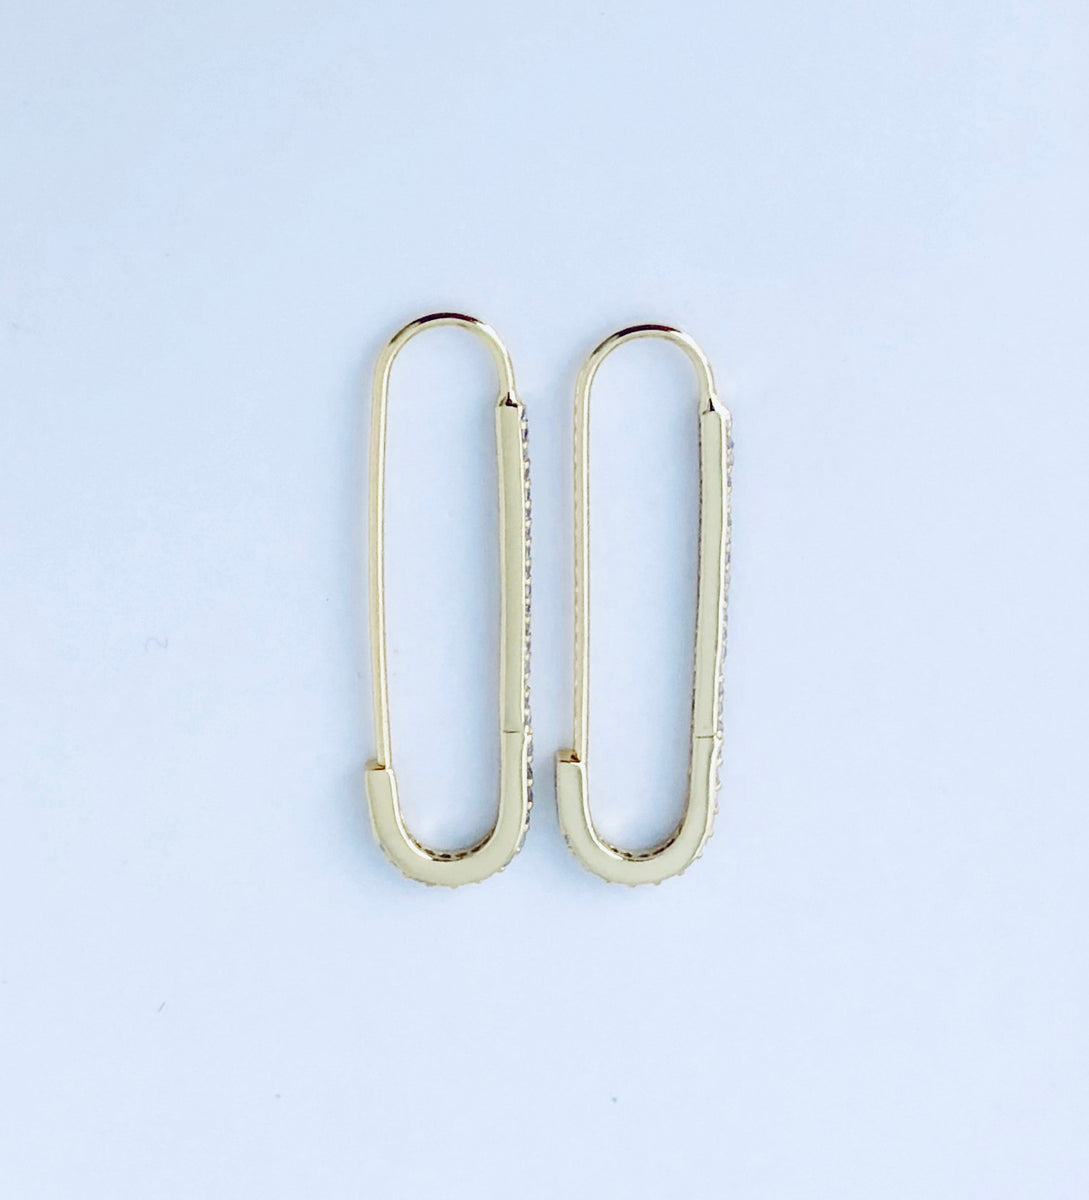 Safety Pin Earring EA20152 Gold Wholesale Price ($200 Minimum Purchase)